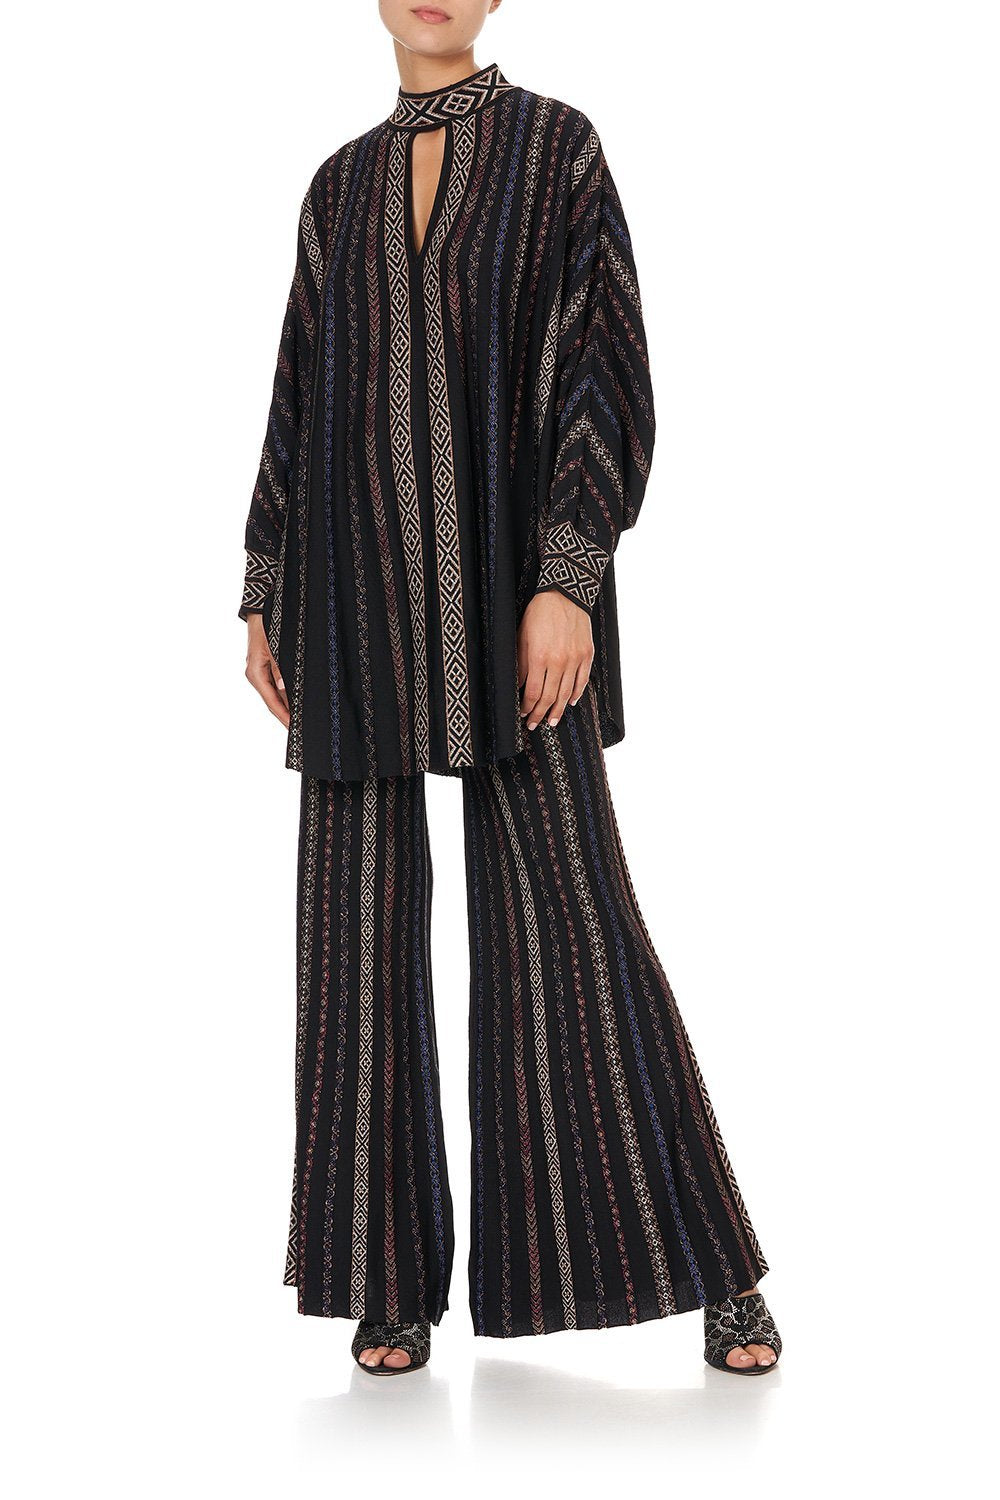 KNITTED KAFTAN WITH NECKBAND SWINGING SIXTIES